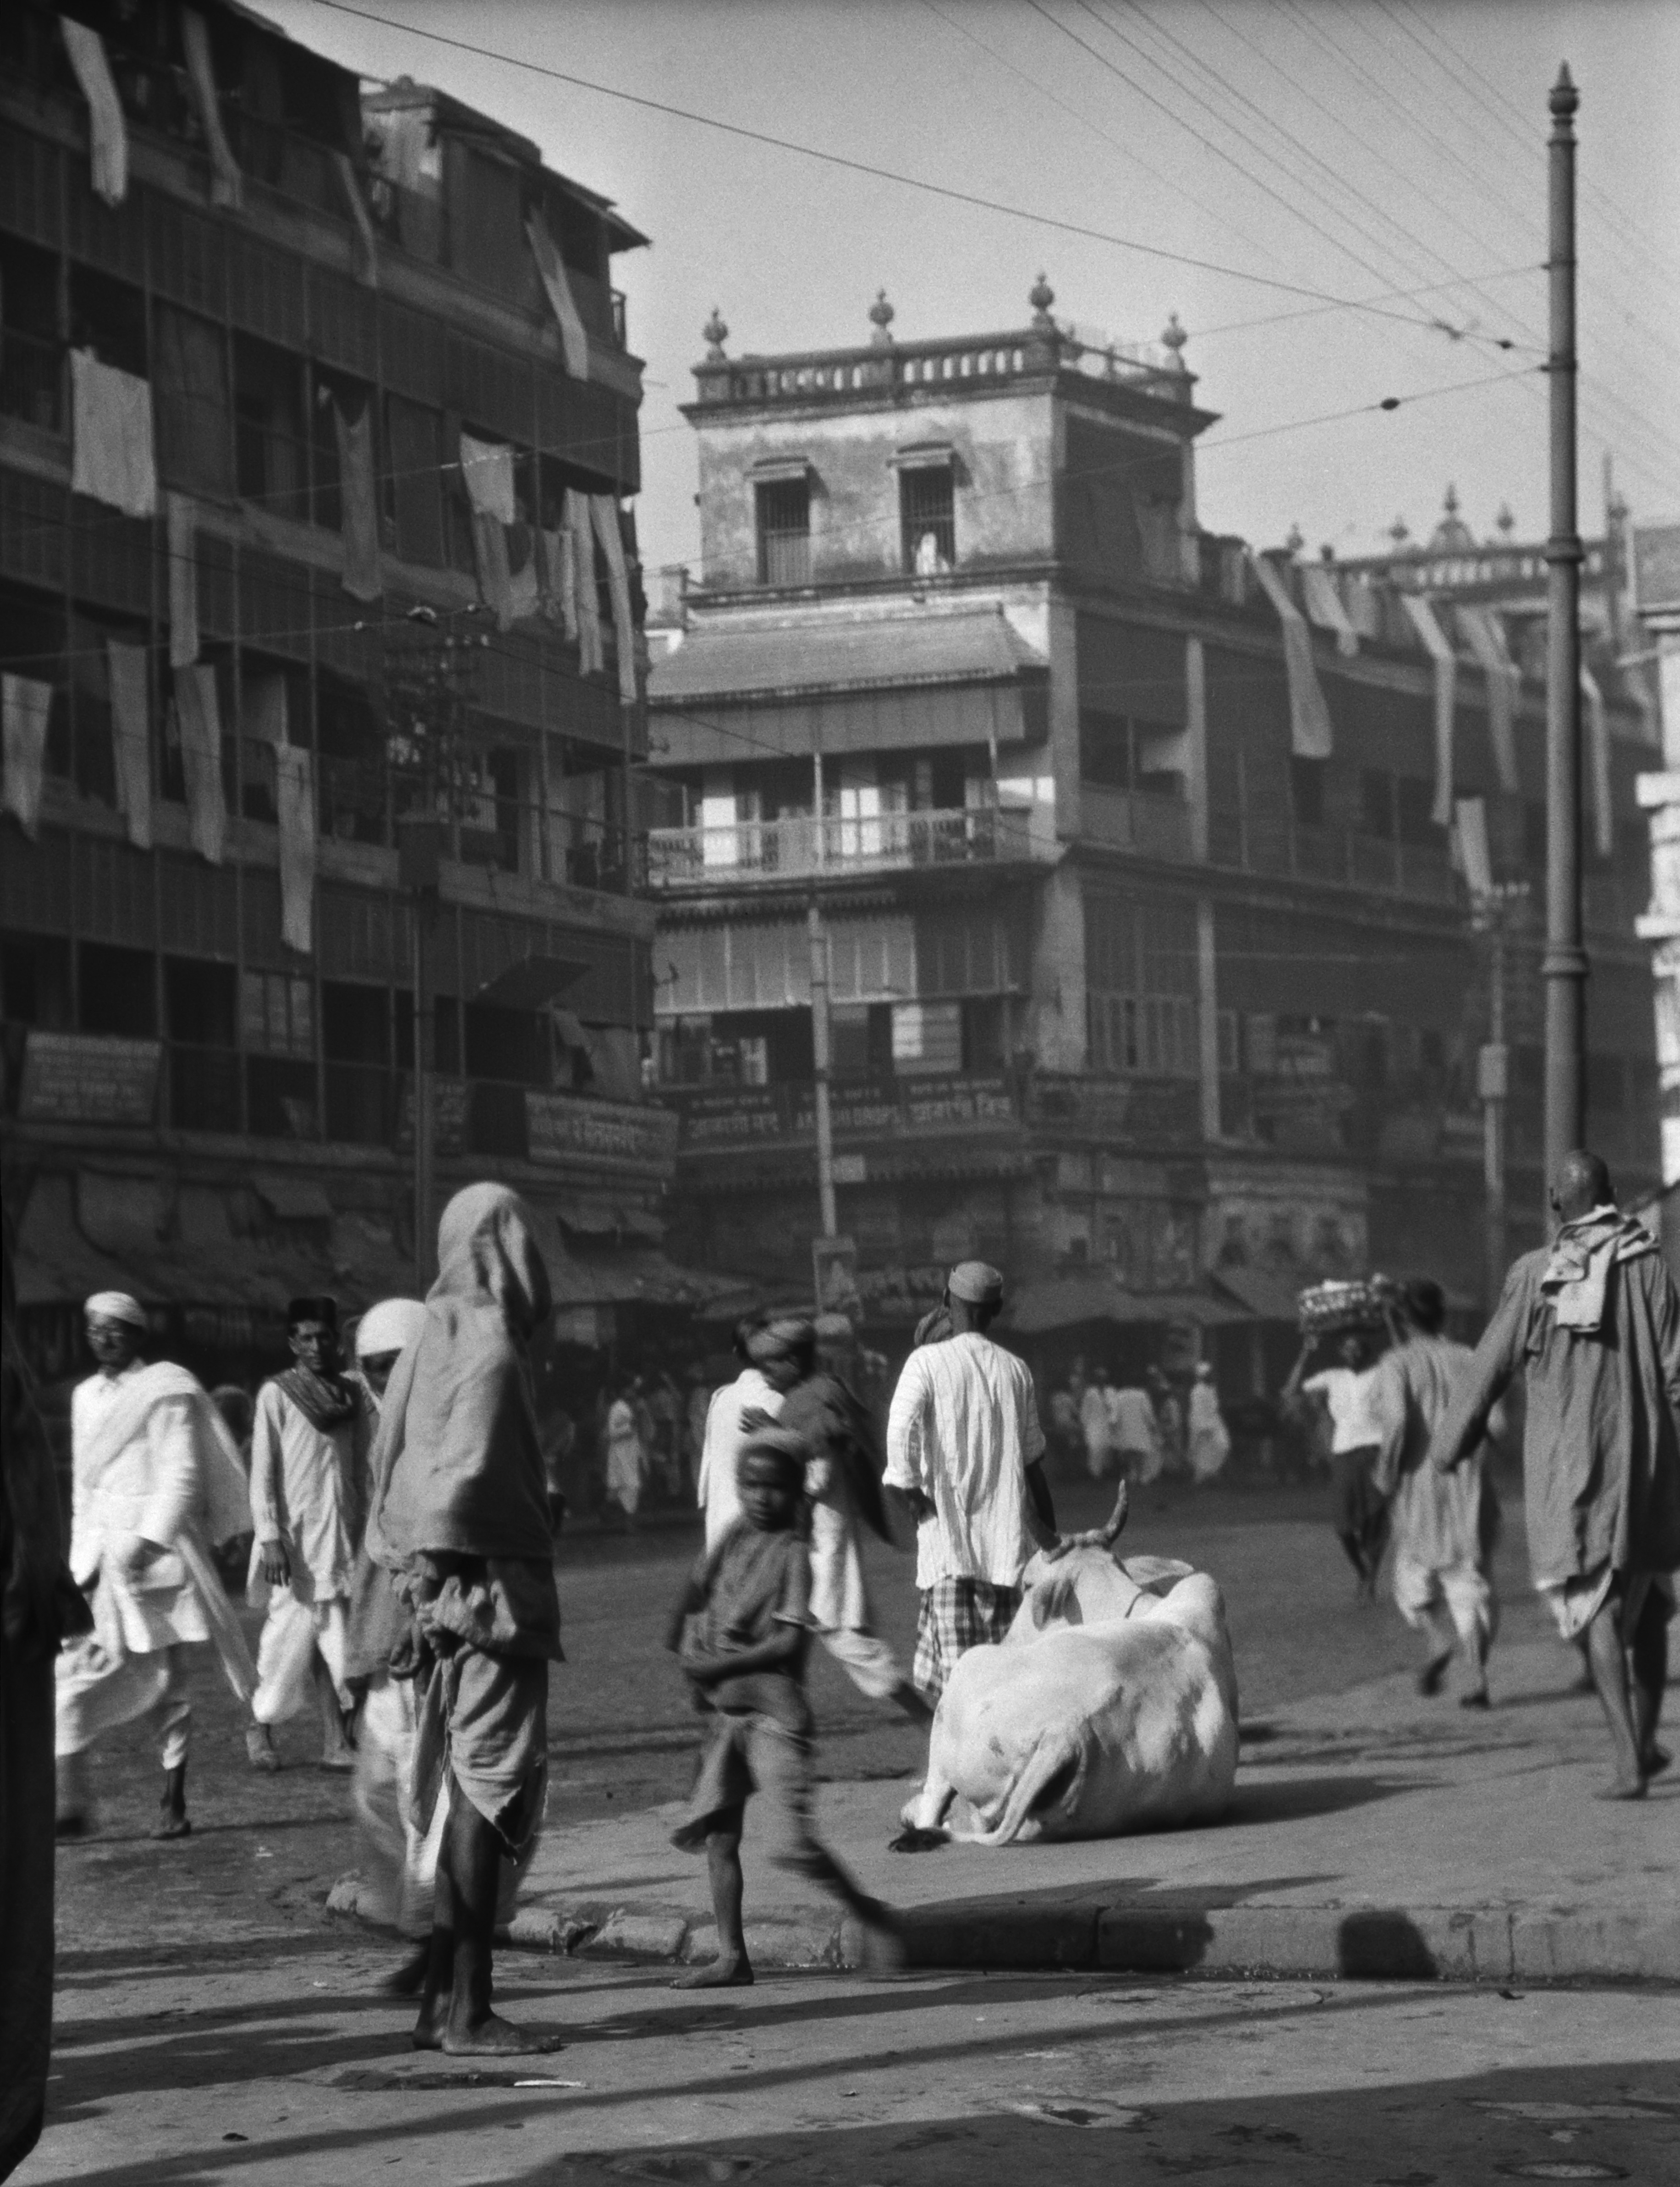 A street in the ‘Native Quarter’ of Calcutta in the 1920s. A newly translated 1923 memoir, Calcutta Nights depicts a man’s nocturnal adventures in the Indian city in the early 1900s. Photo: Getty Images